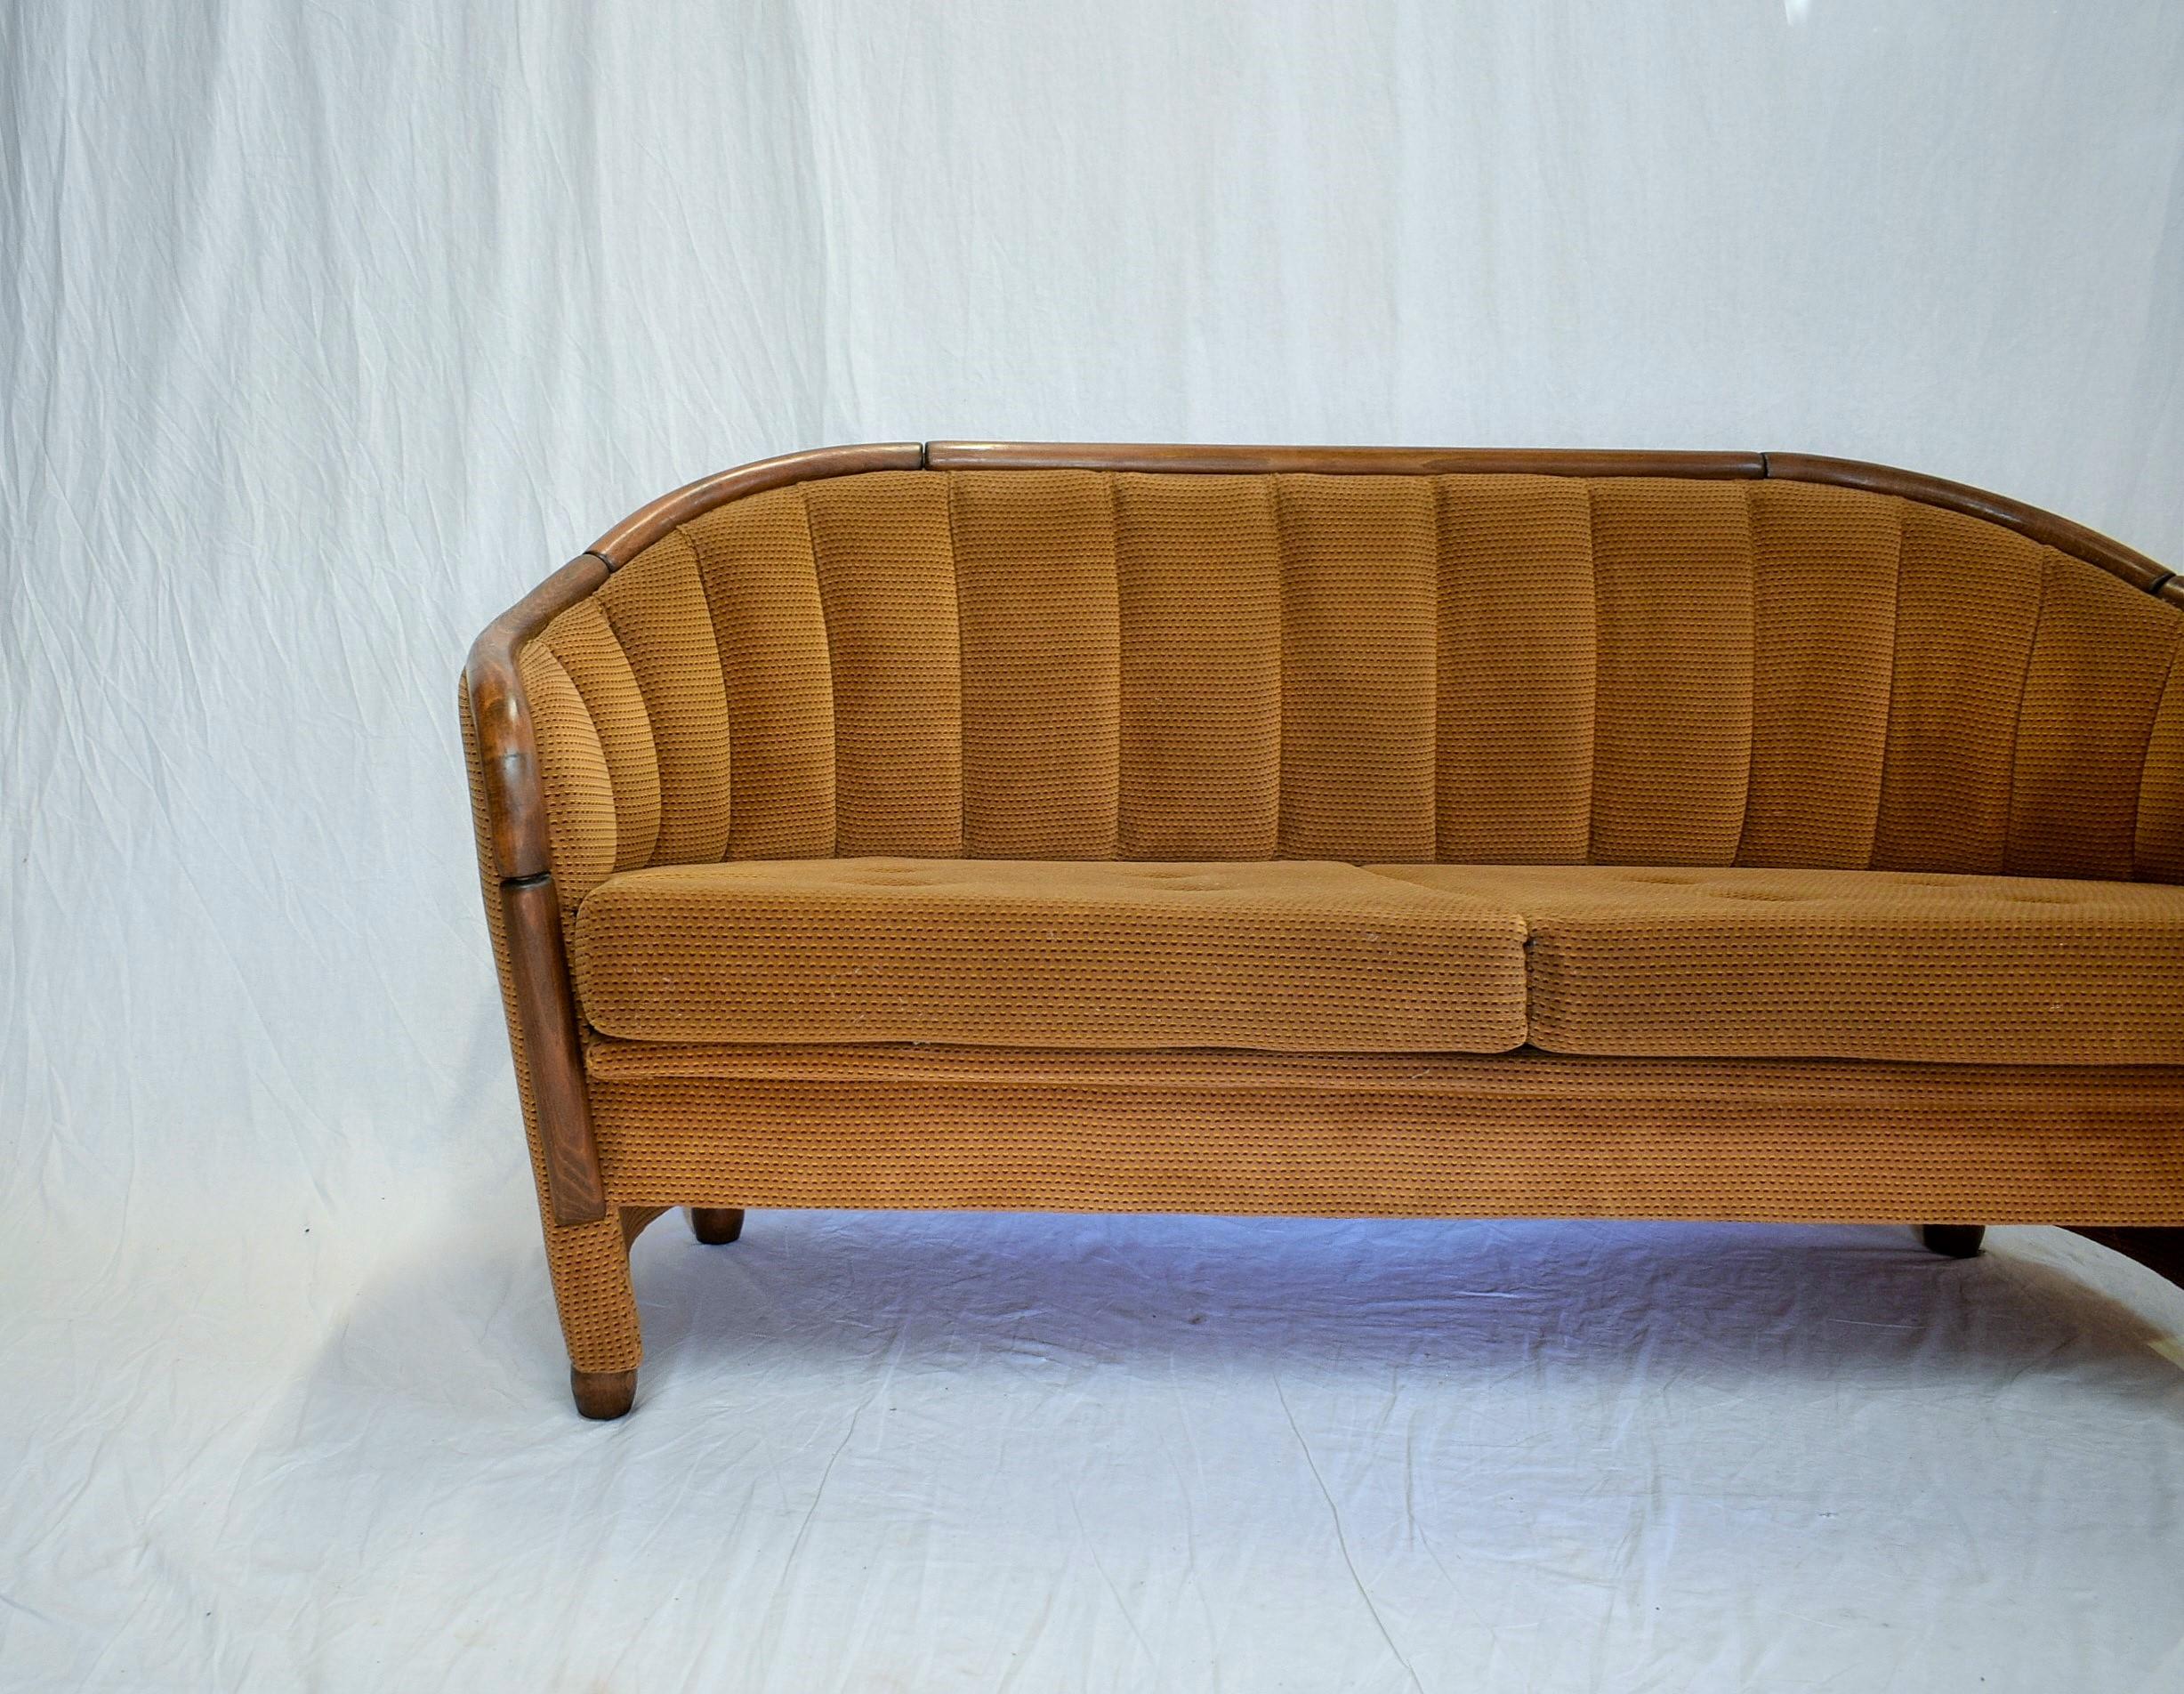 1950s style couch